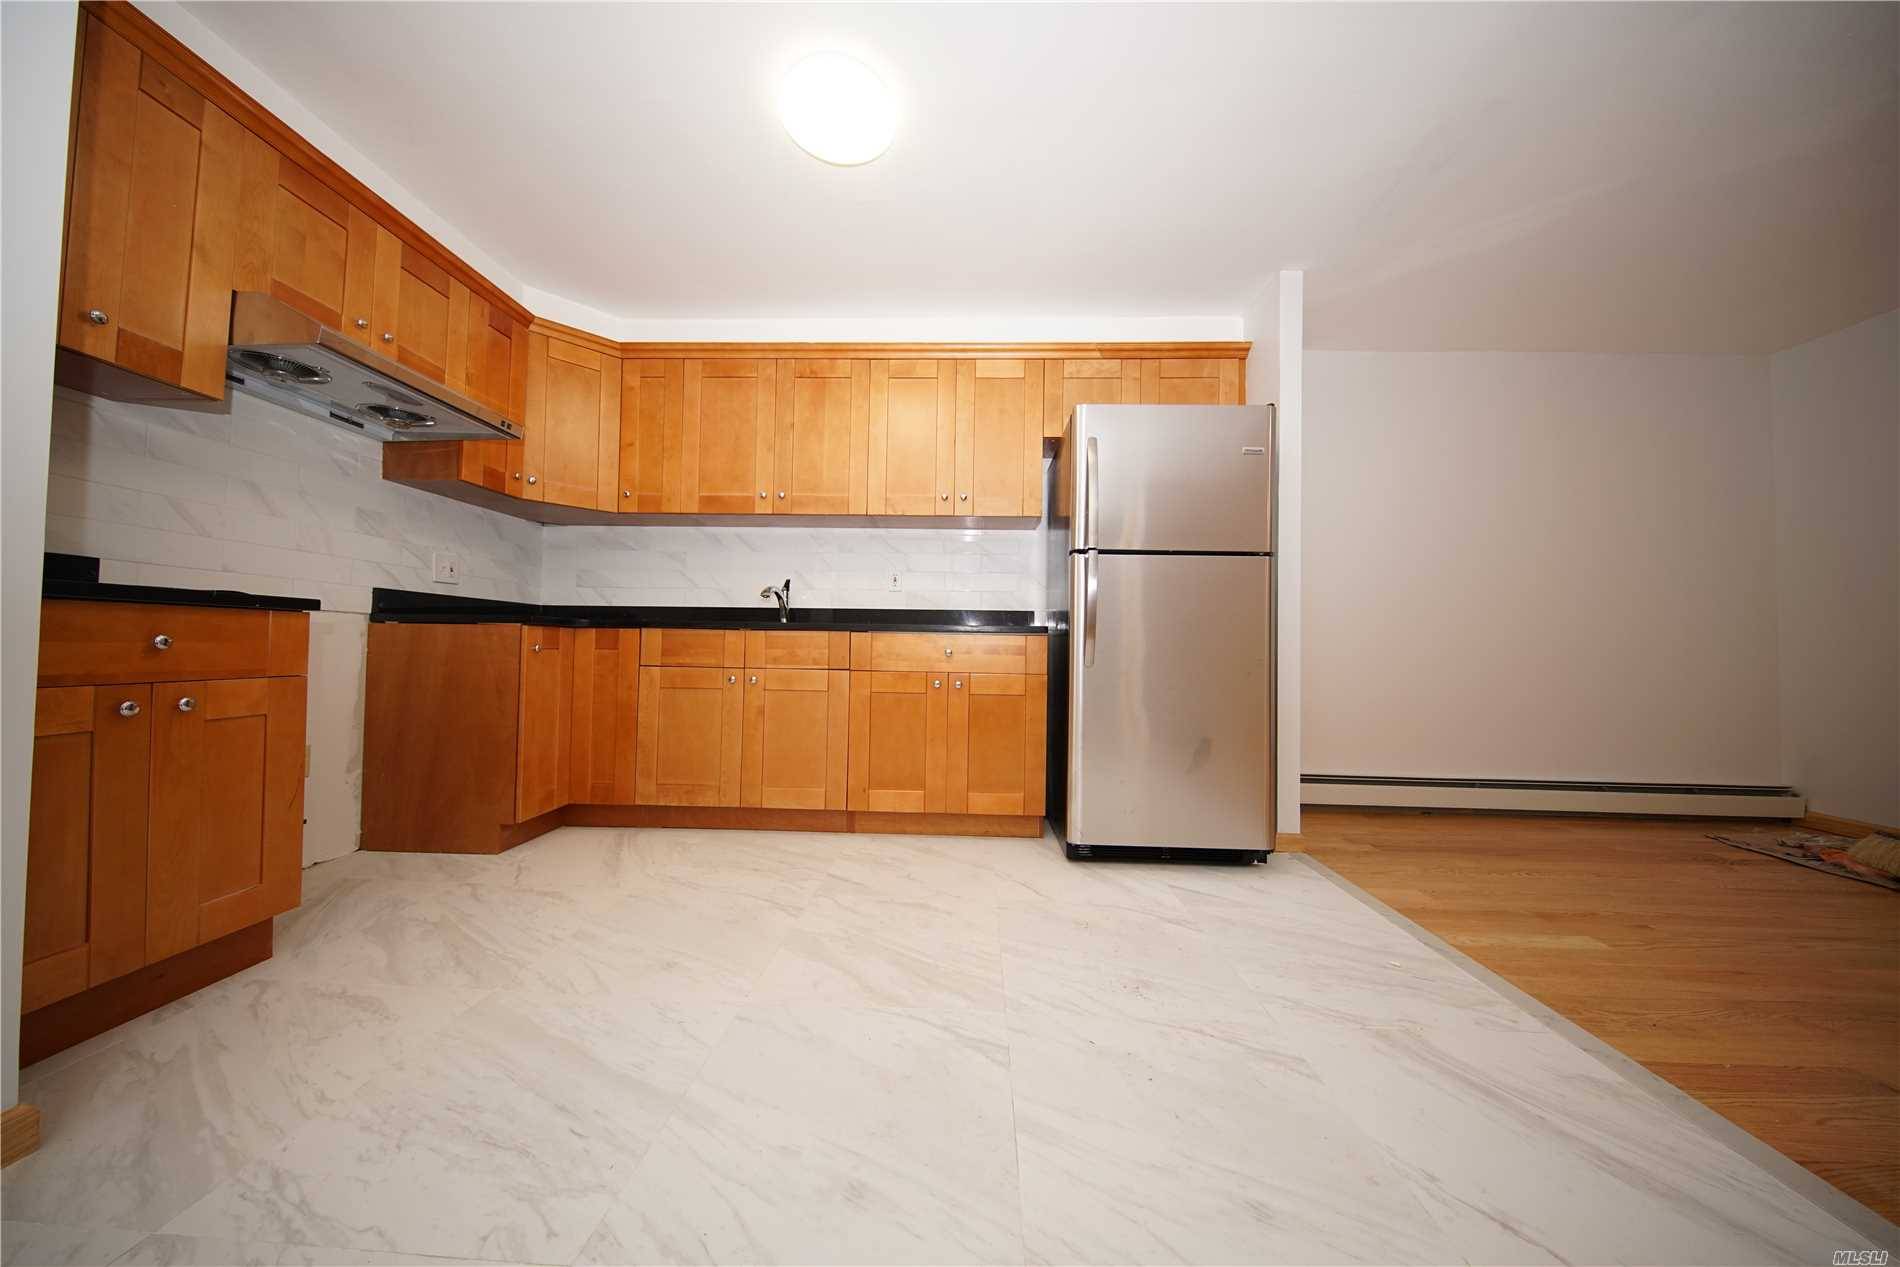 Excellent Location, New Renovated 3 Bedroom, 2 Full Bath.